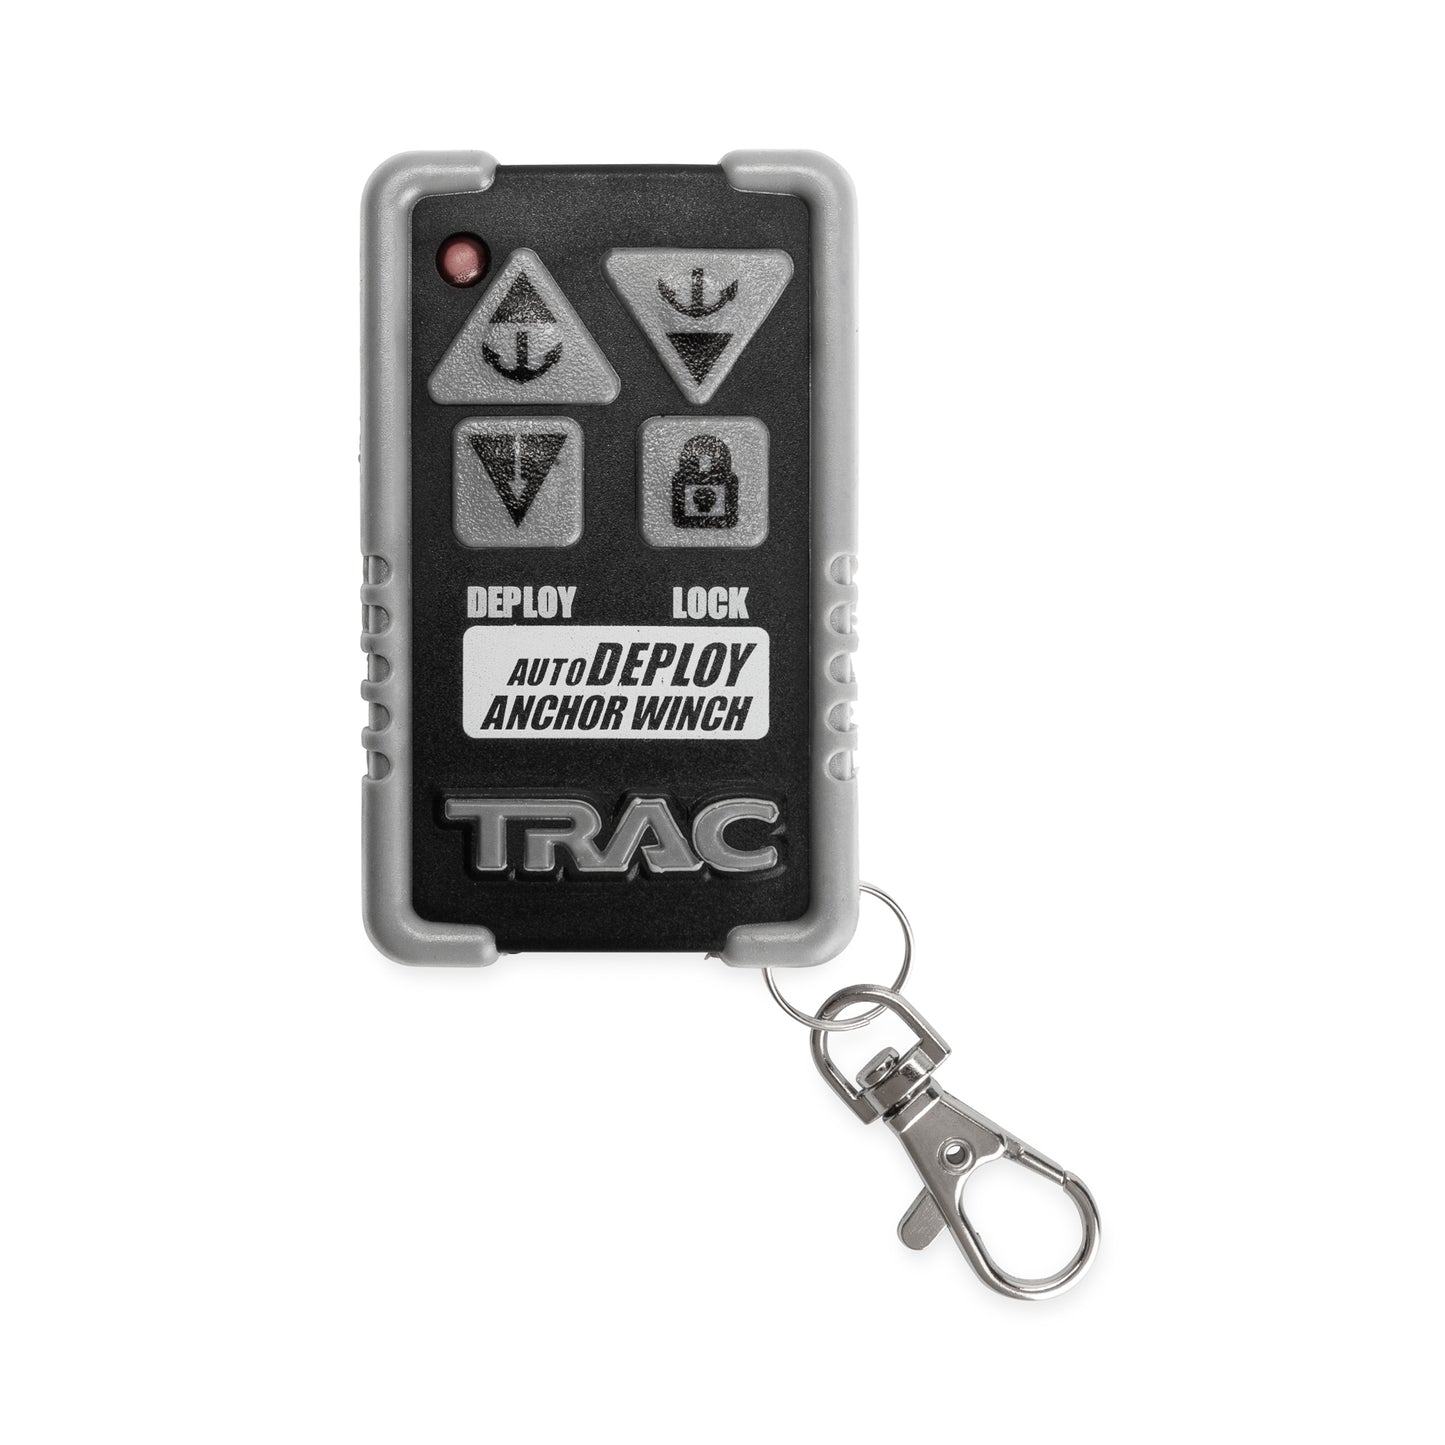 TRAC Outdoors G3 Wireless Remote Unit